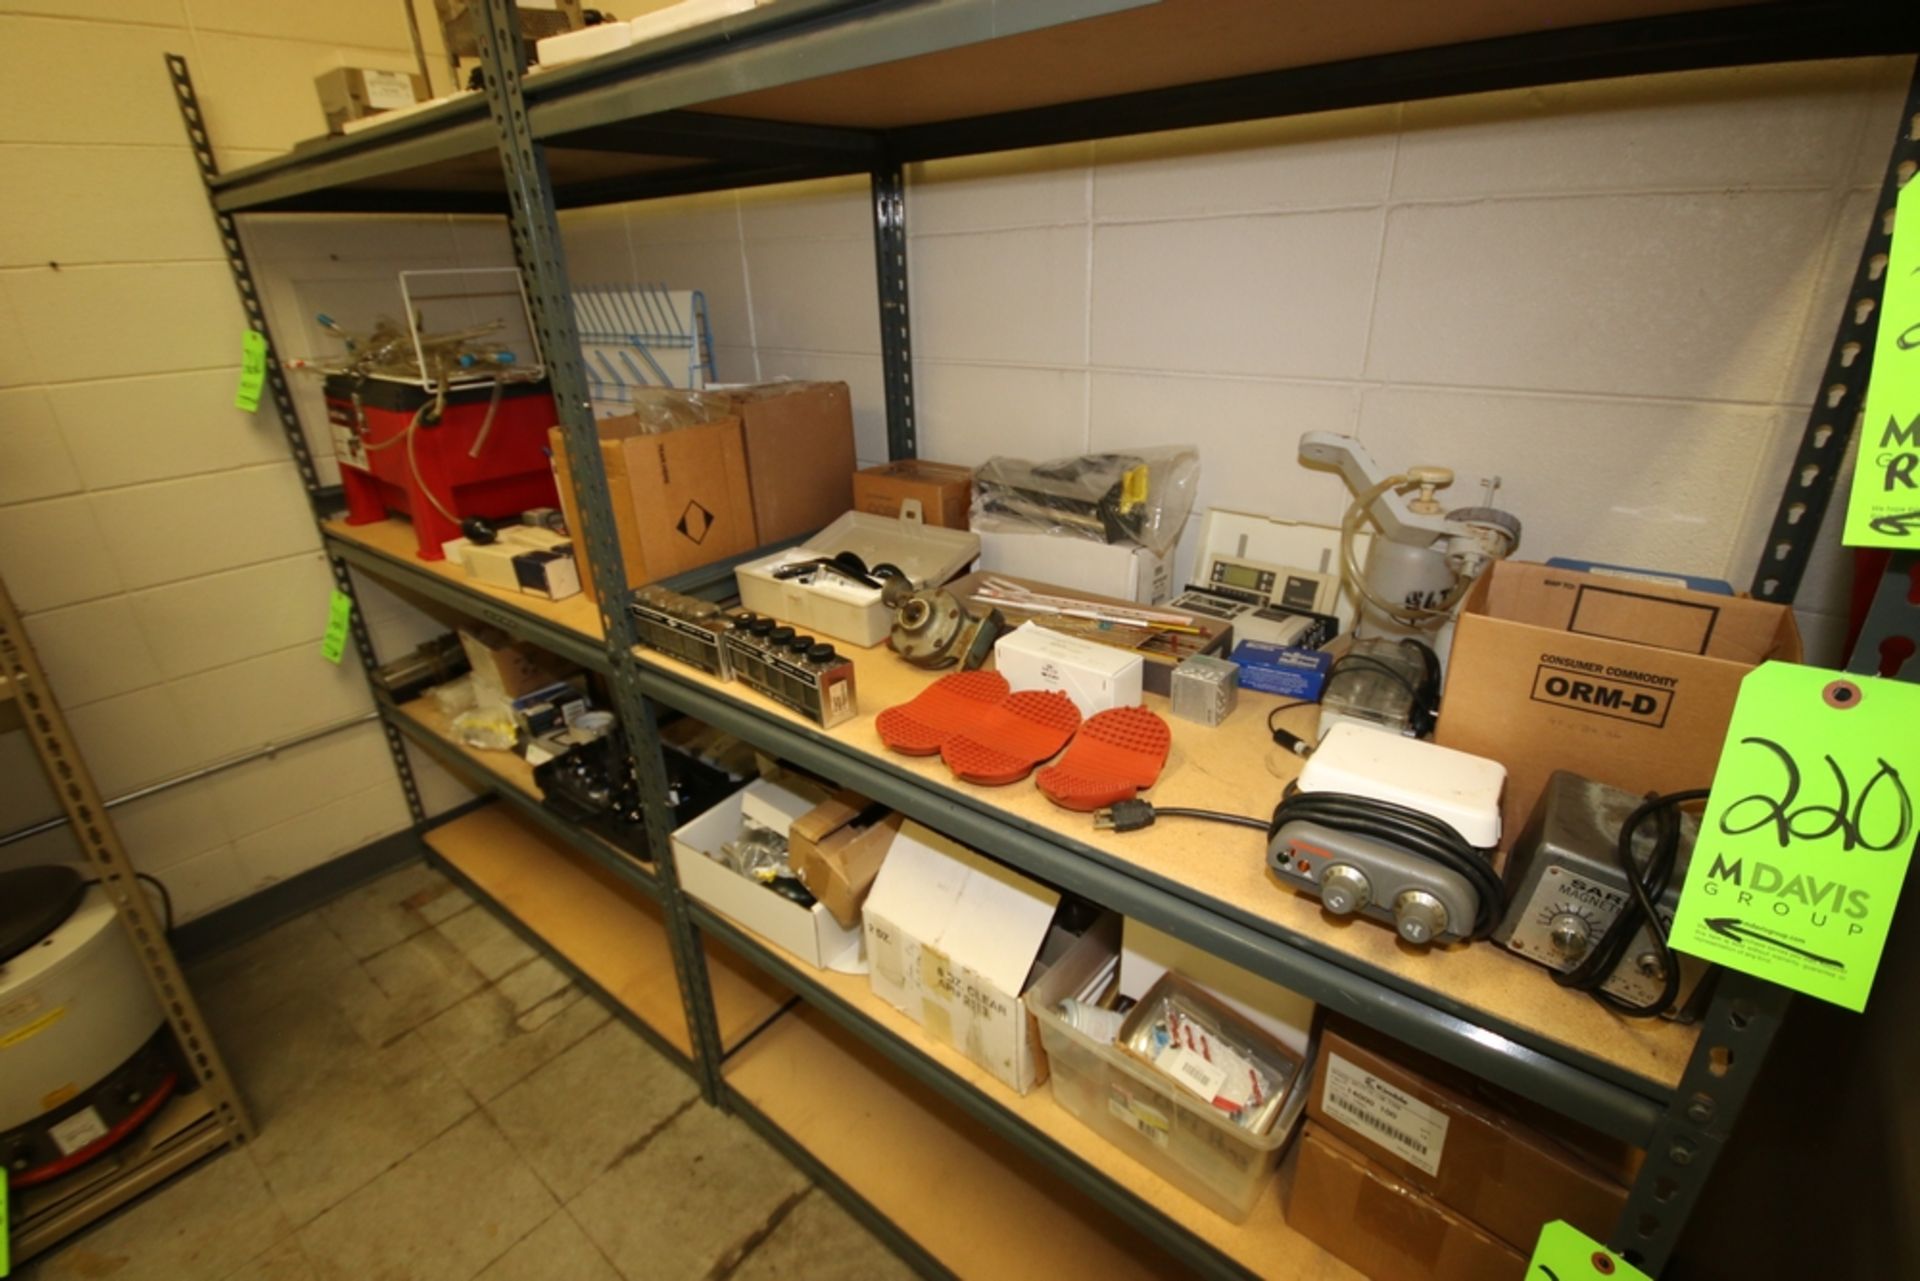 Contents of Shelf, Includes (2) Hot Plates, (3) Hot Surface Grips, Beaker Drying Racks, Time